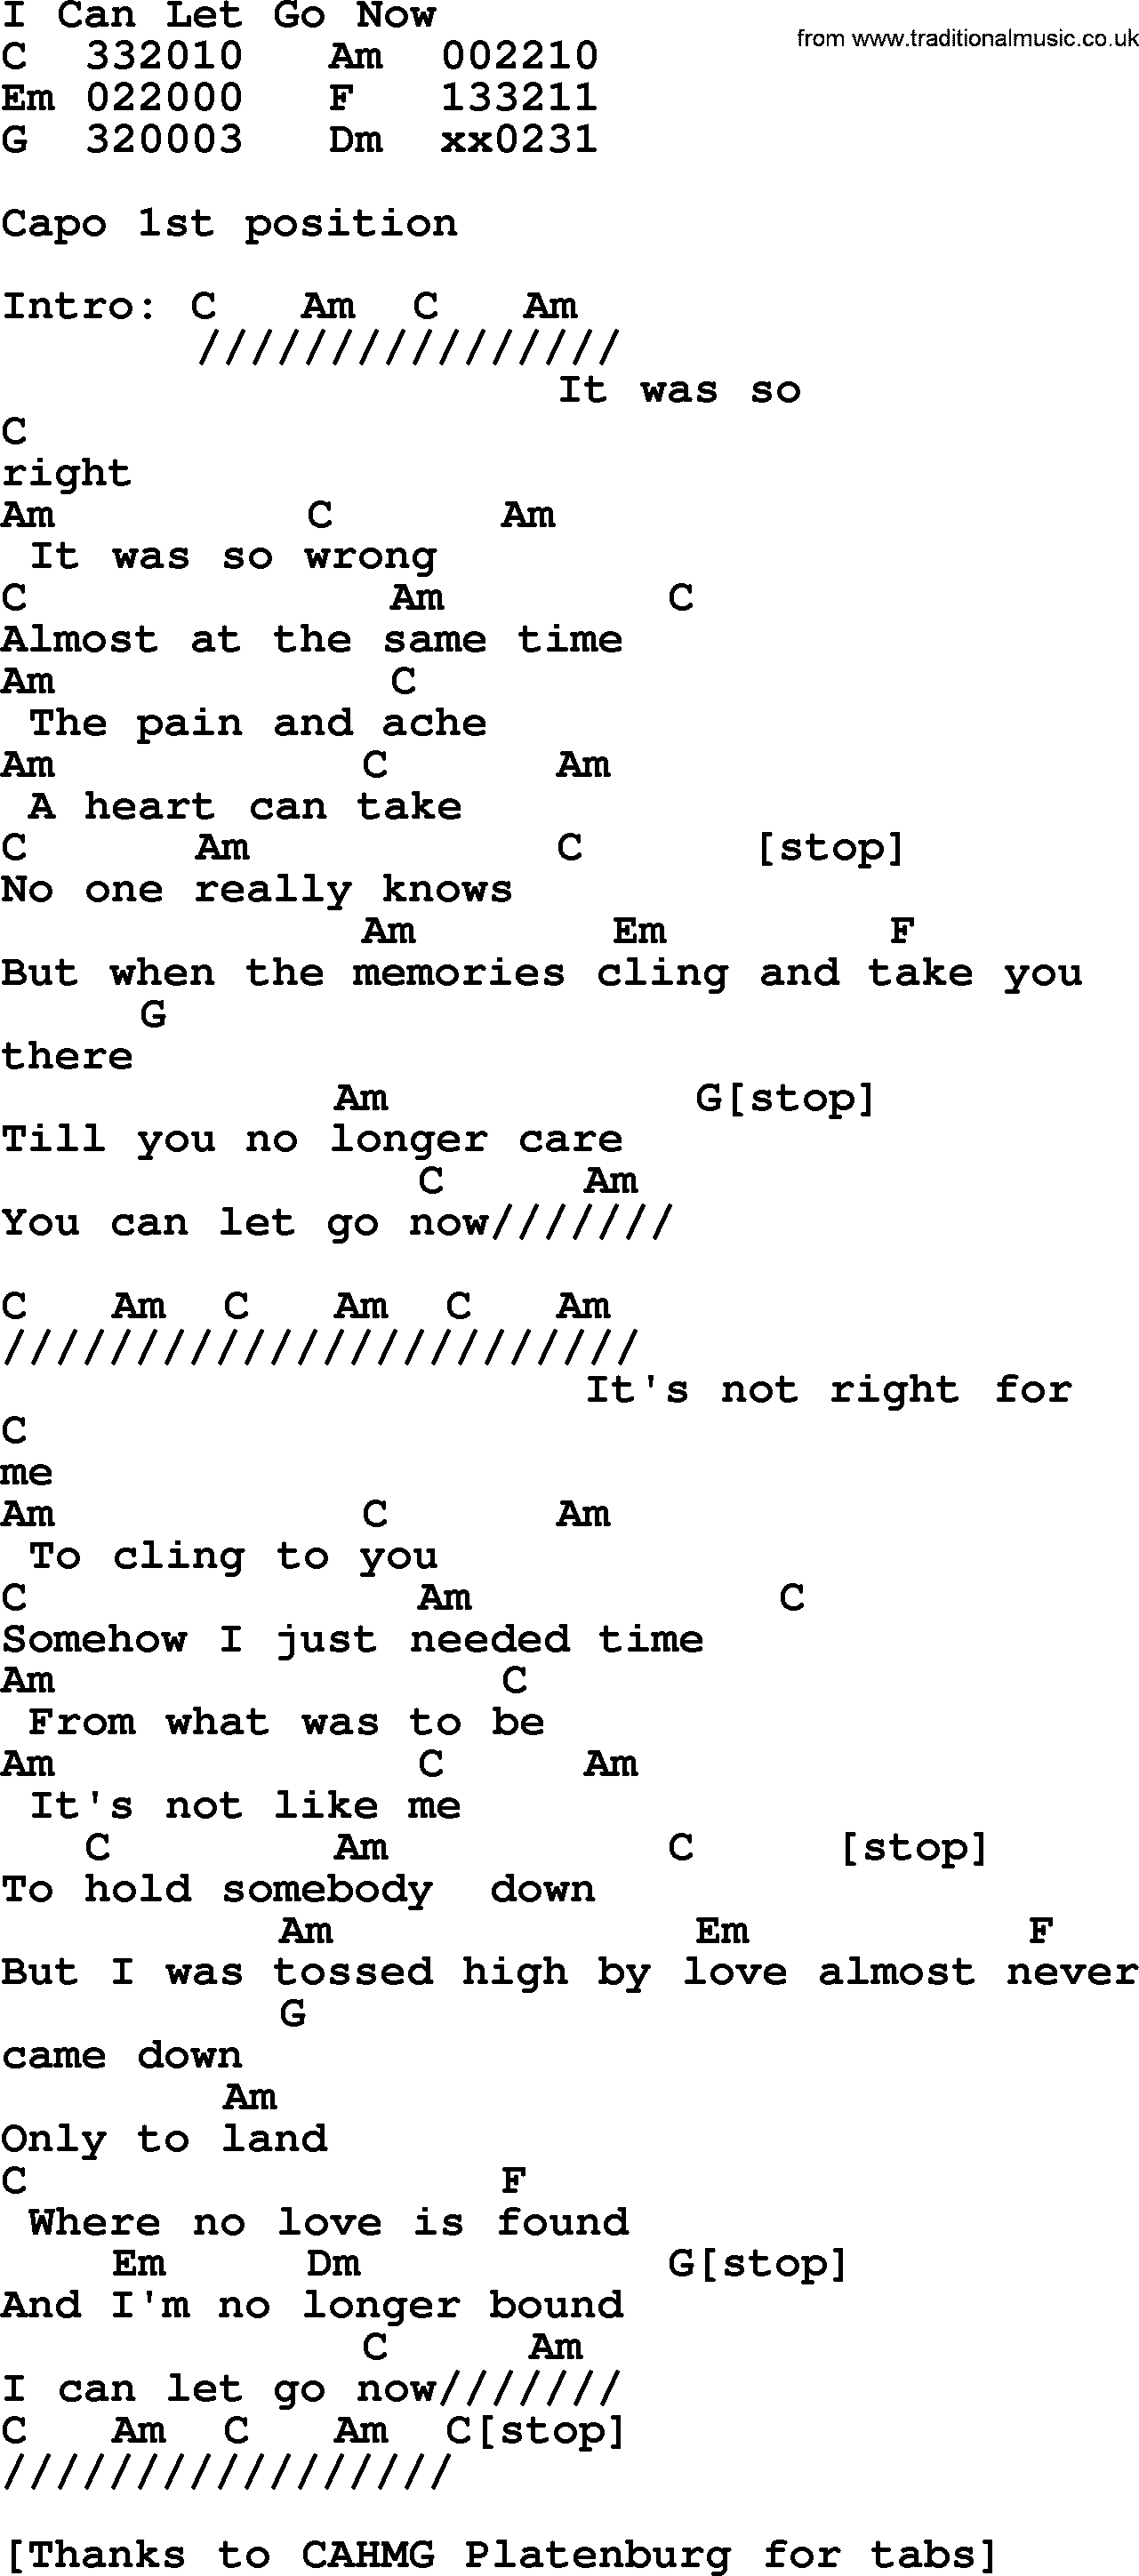 Bluegrass song: I Can Let Go Now, lyrics and chords